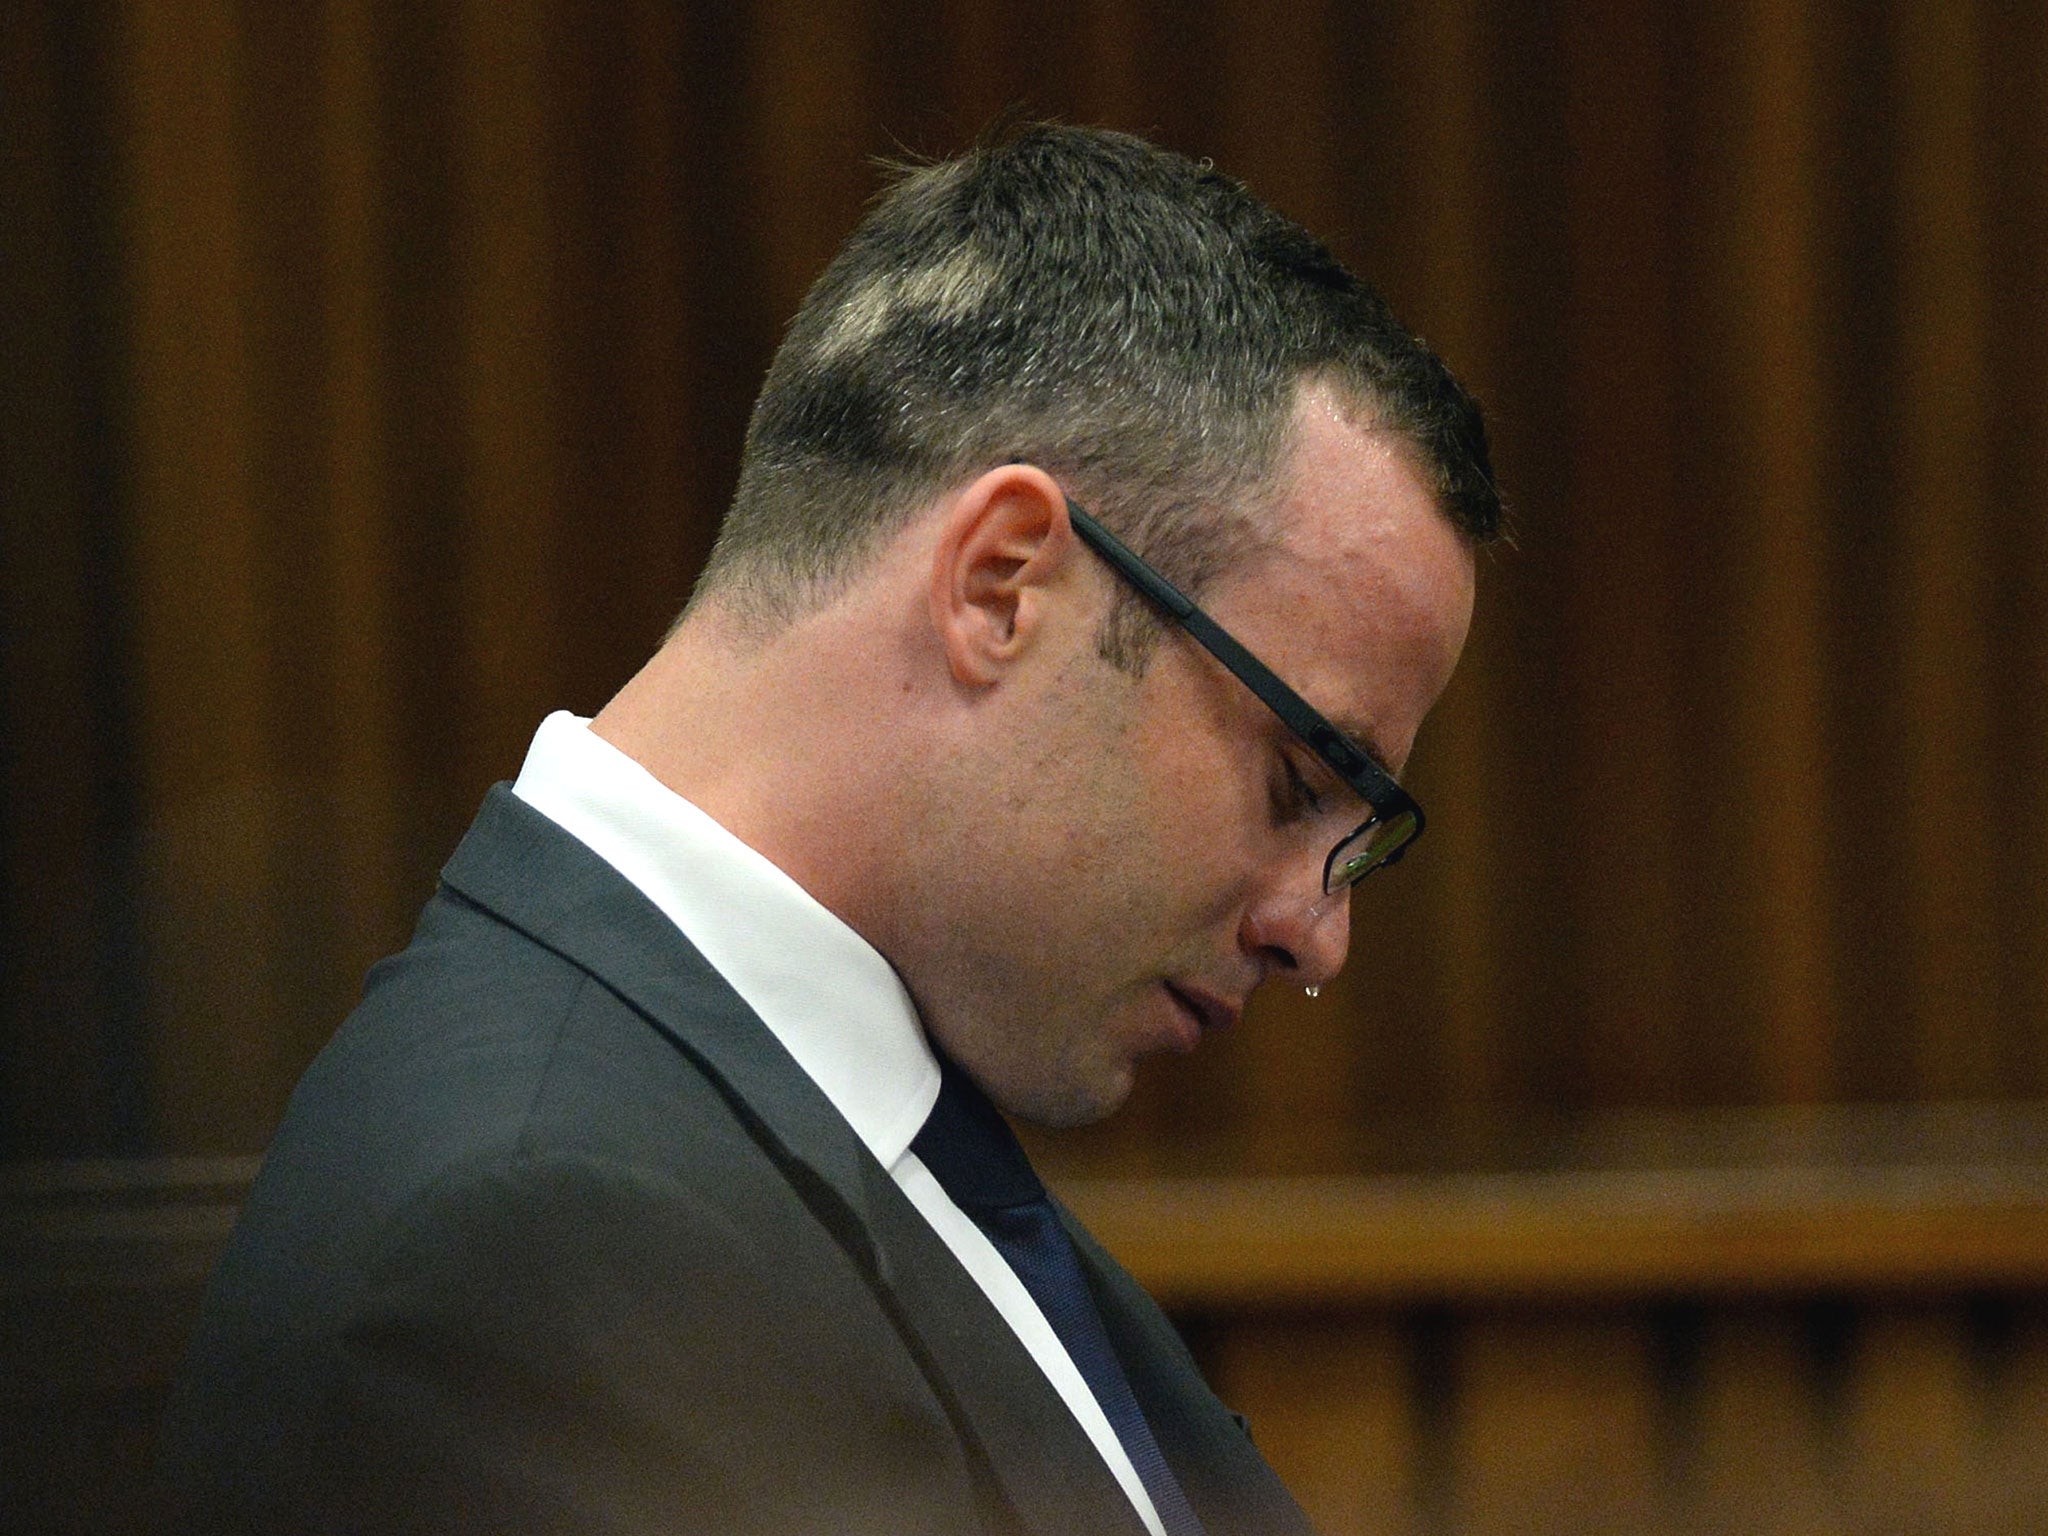 Oscar Pistorius cries as he sits in the dock during his ongoing murder trial in Pretoria